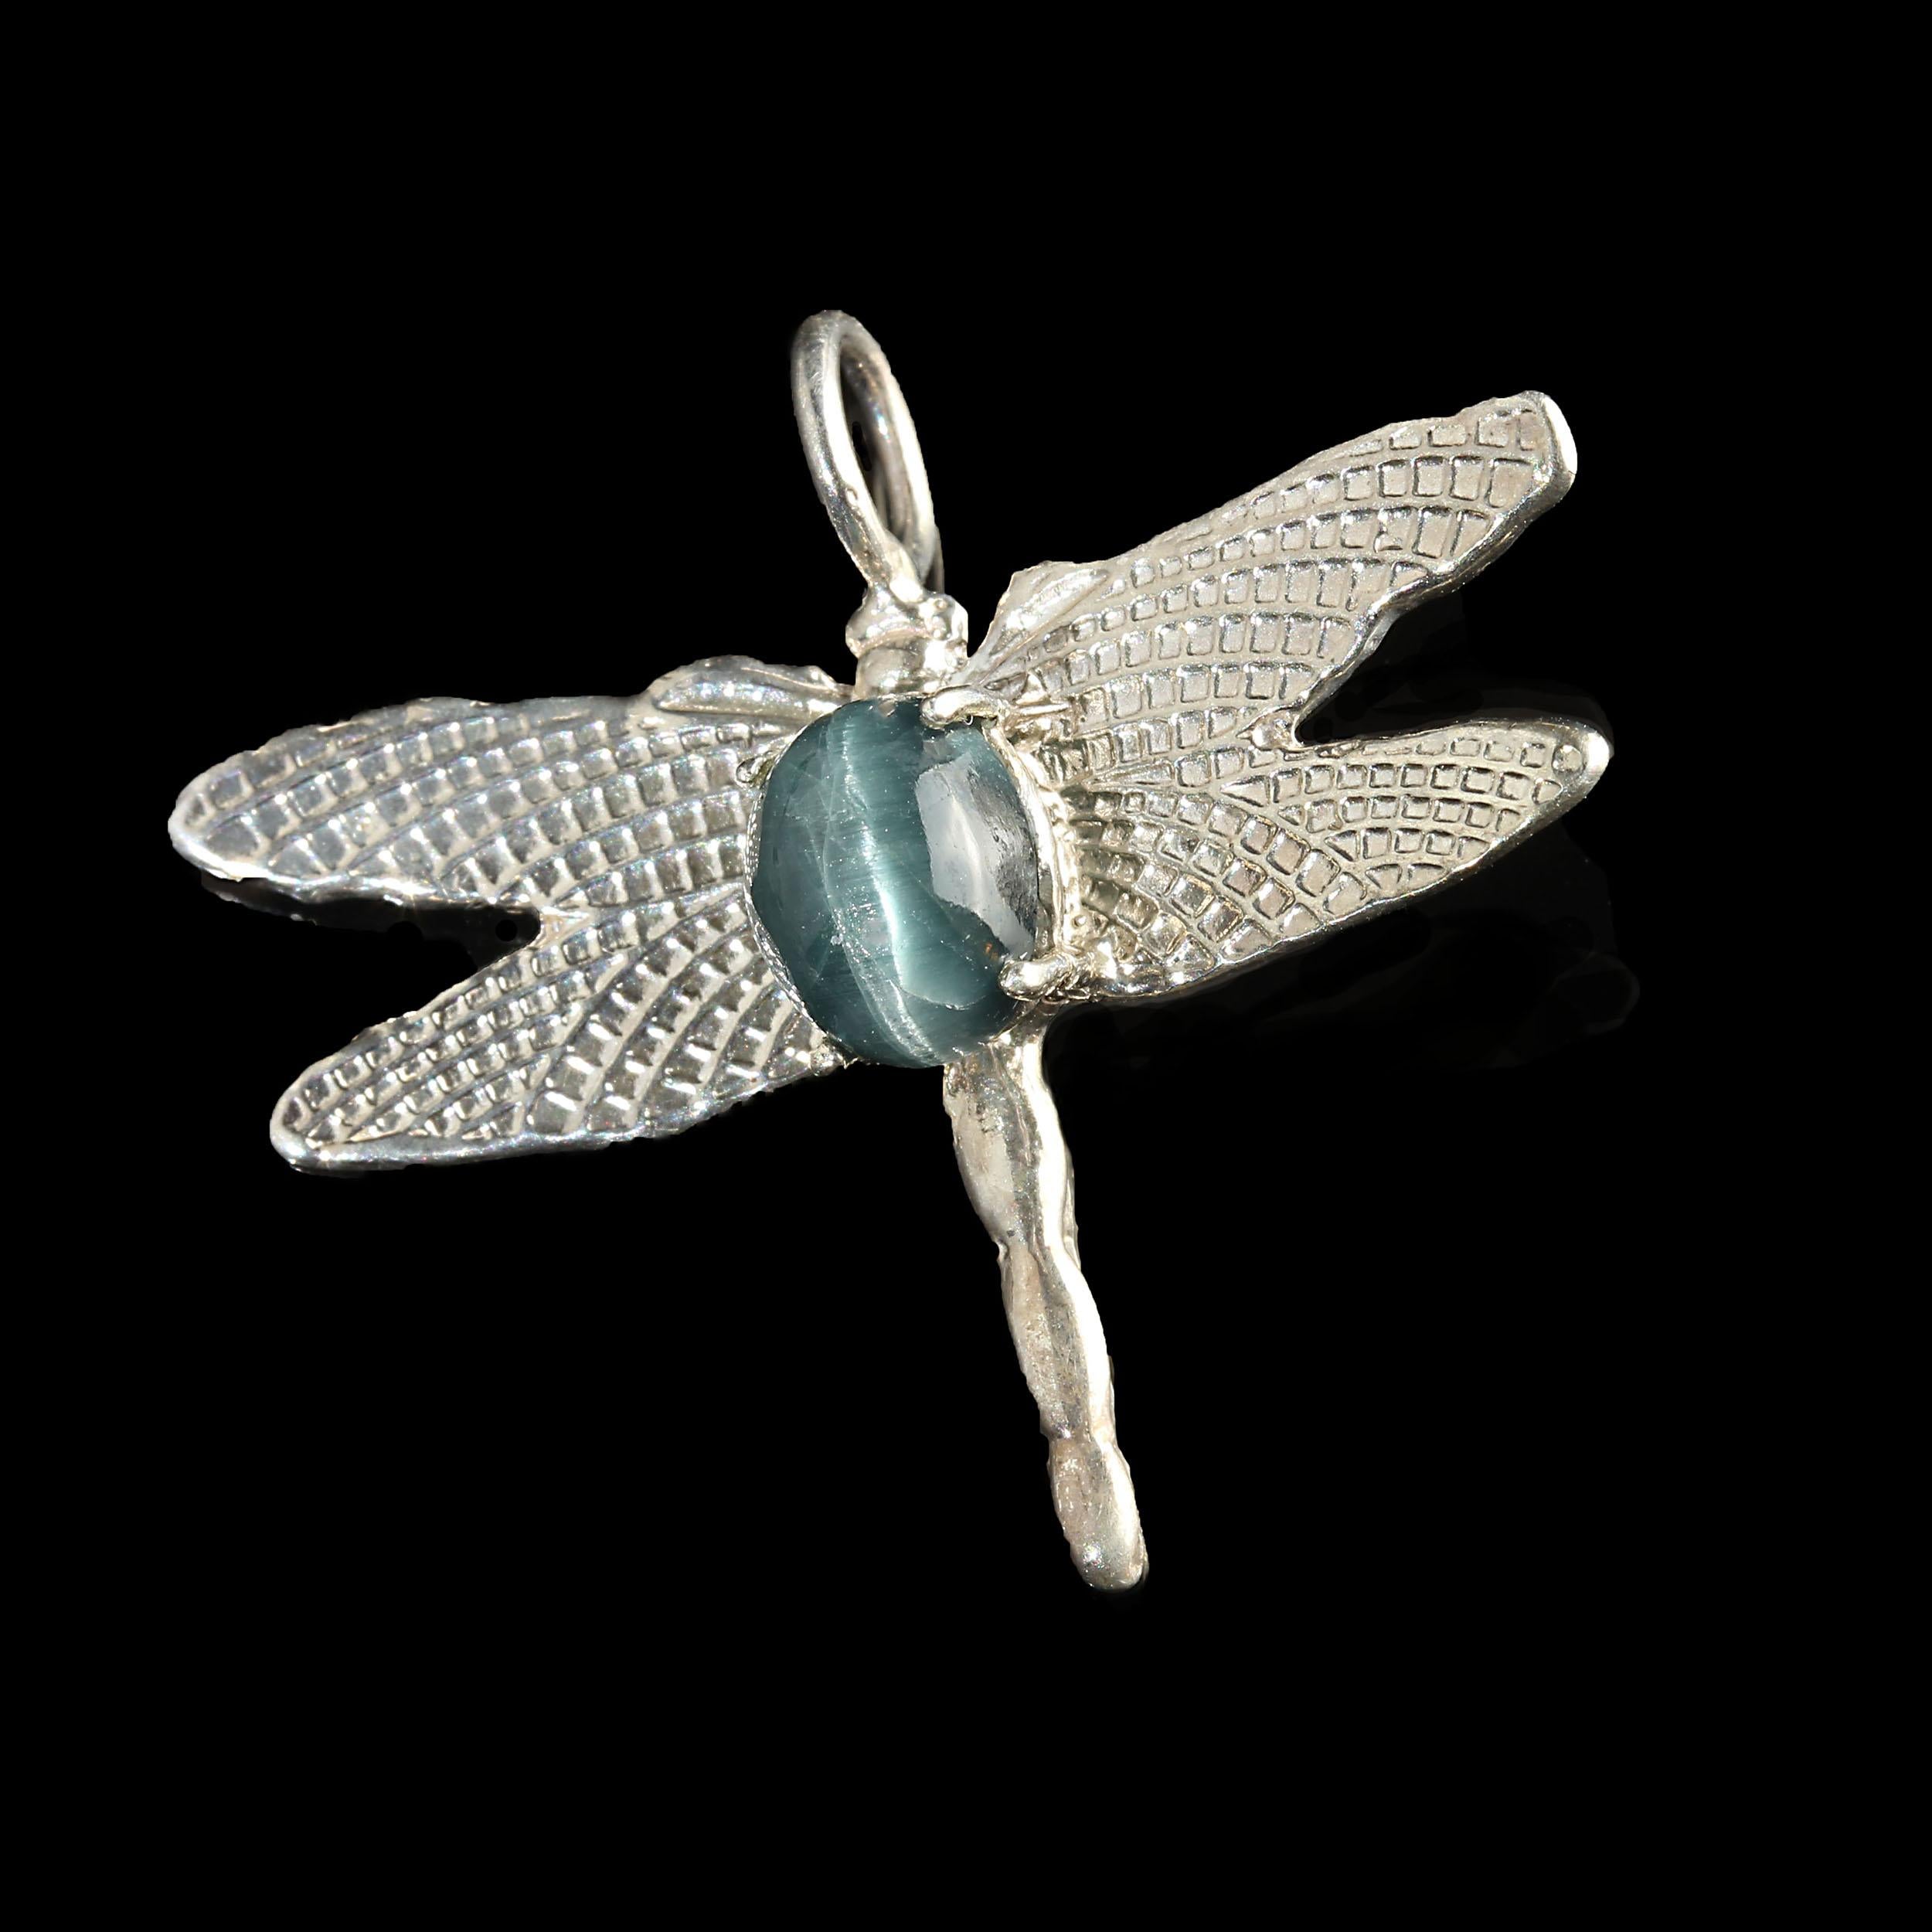 Cabochon AJD Blue Cat's Eye Tourmaline Set in Sterling Silver Dragonfly Pendant For Sale